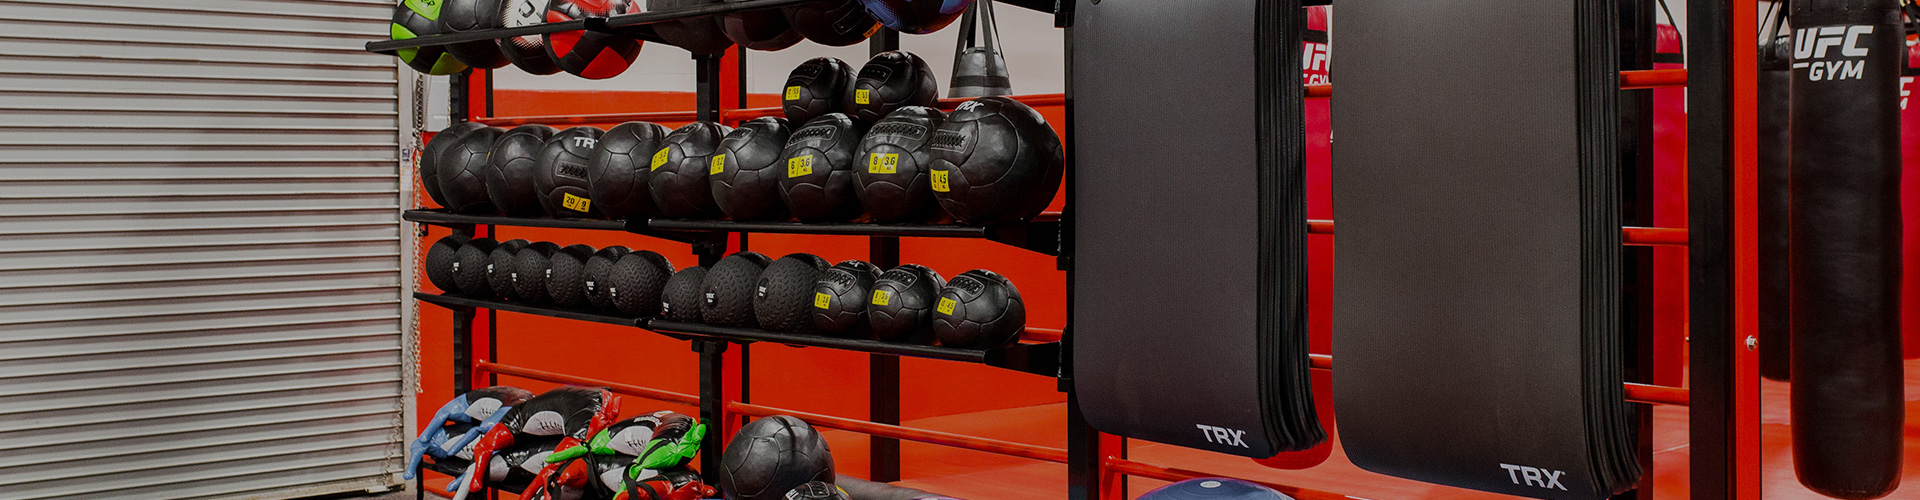 black and red workout equipment on gym racks